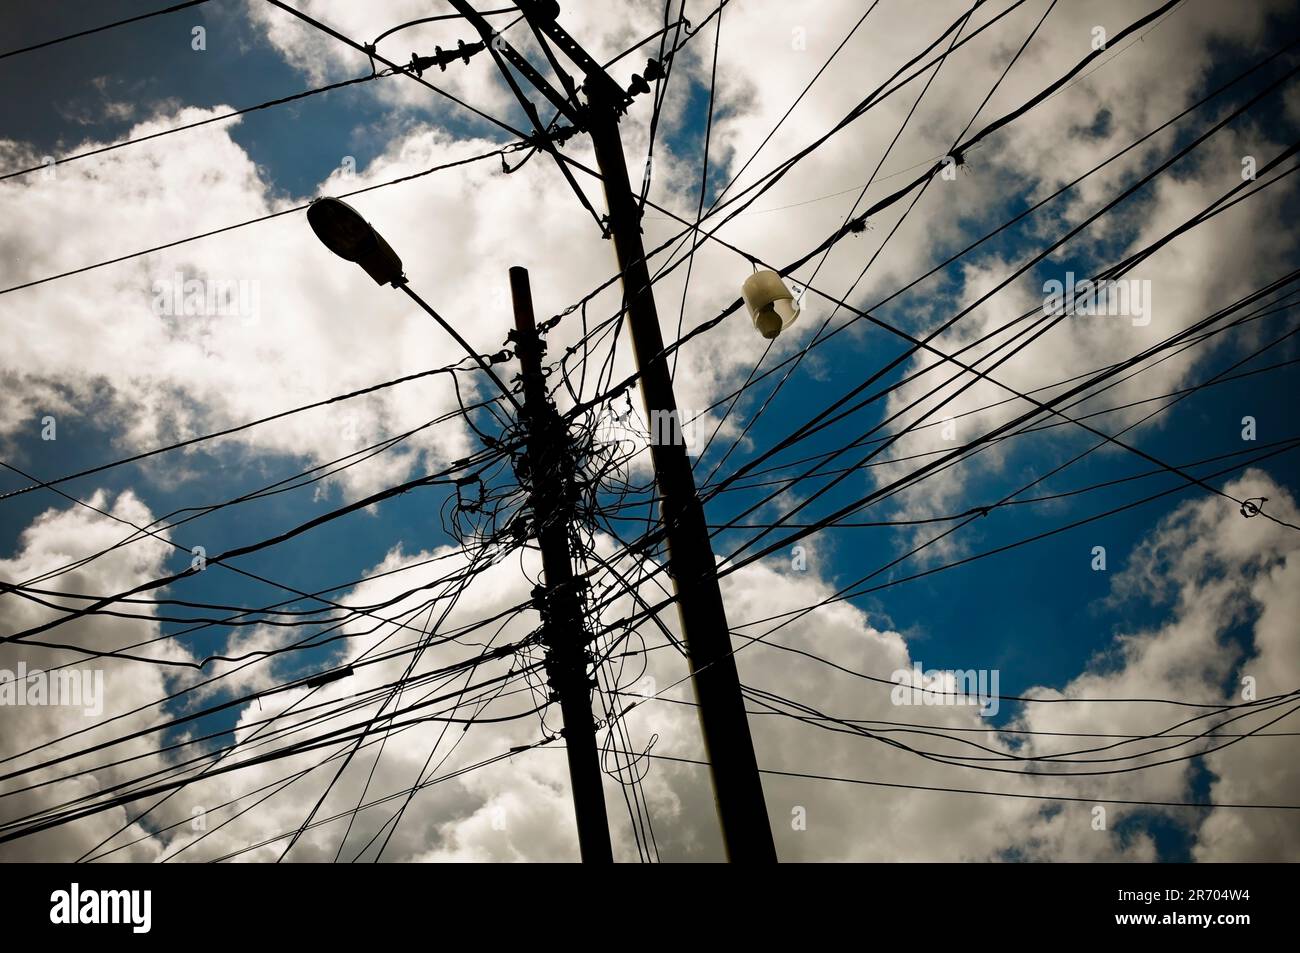 Tangled powerlines in a slum in Caracas, Venezuela  represent the energy crises causing blackouts across the country. Stock Photo